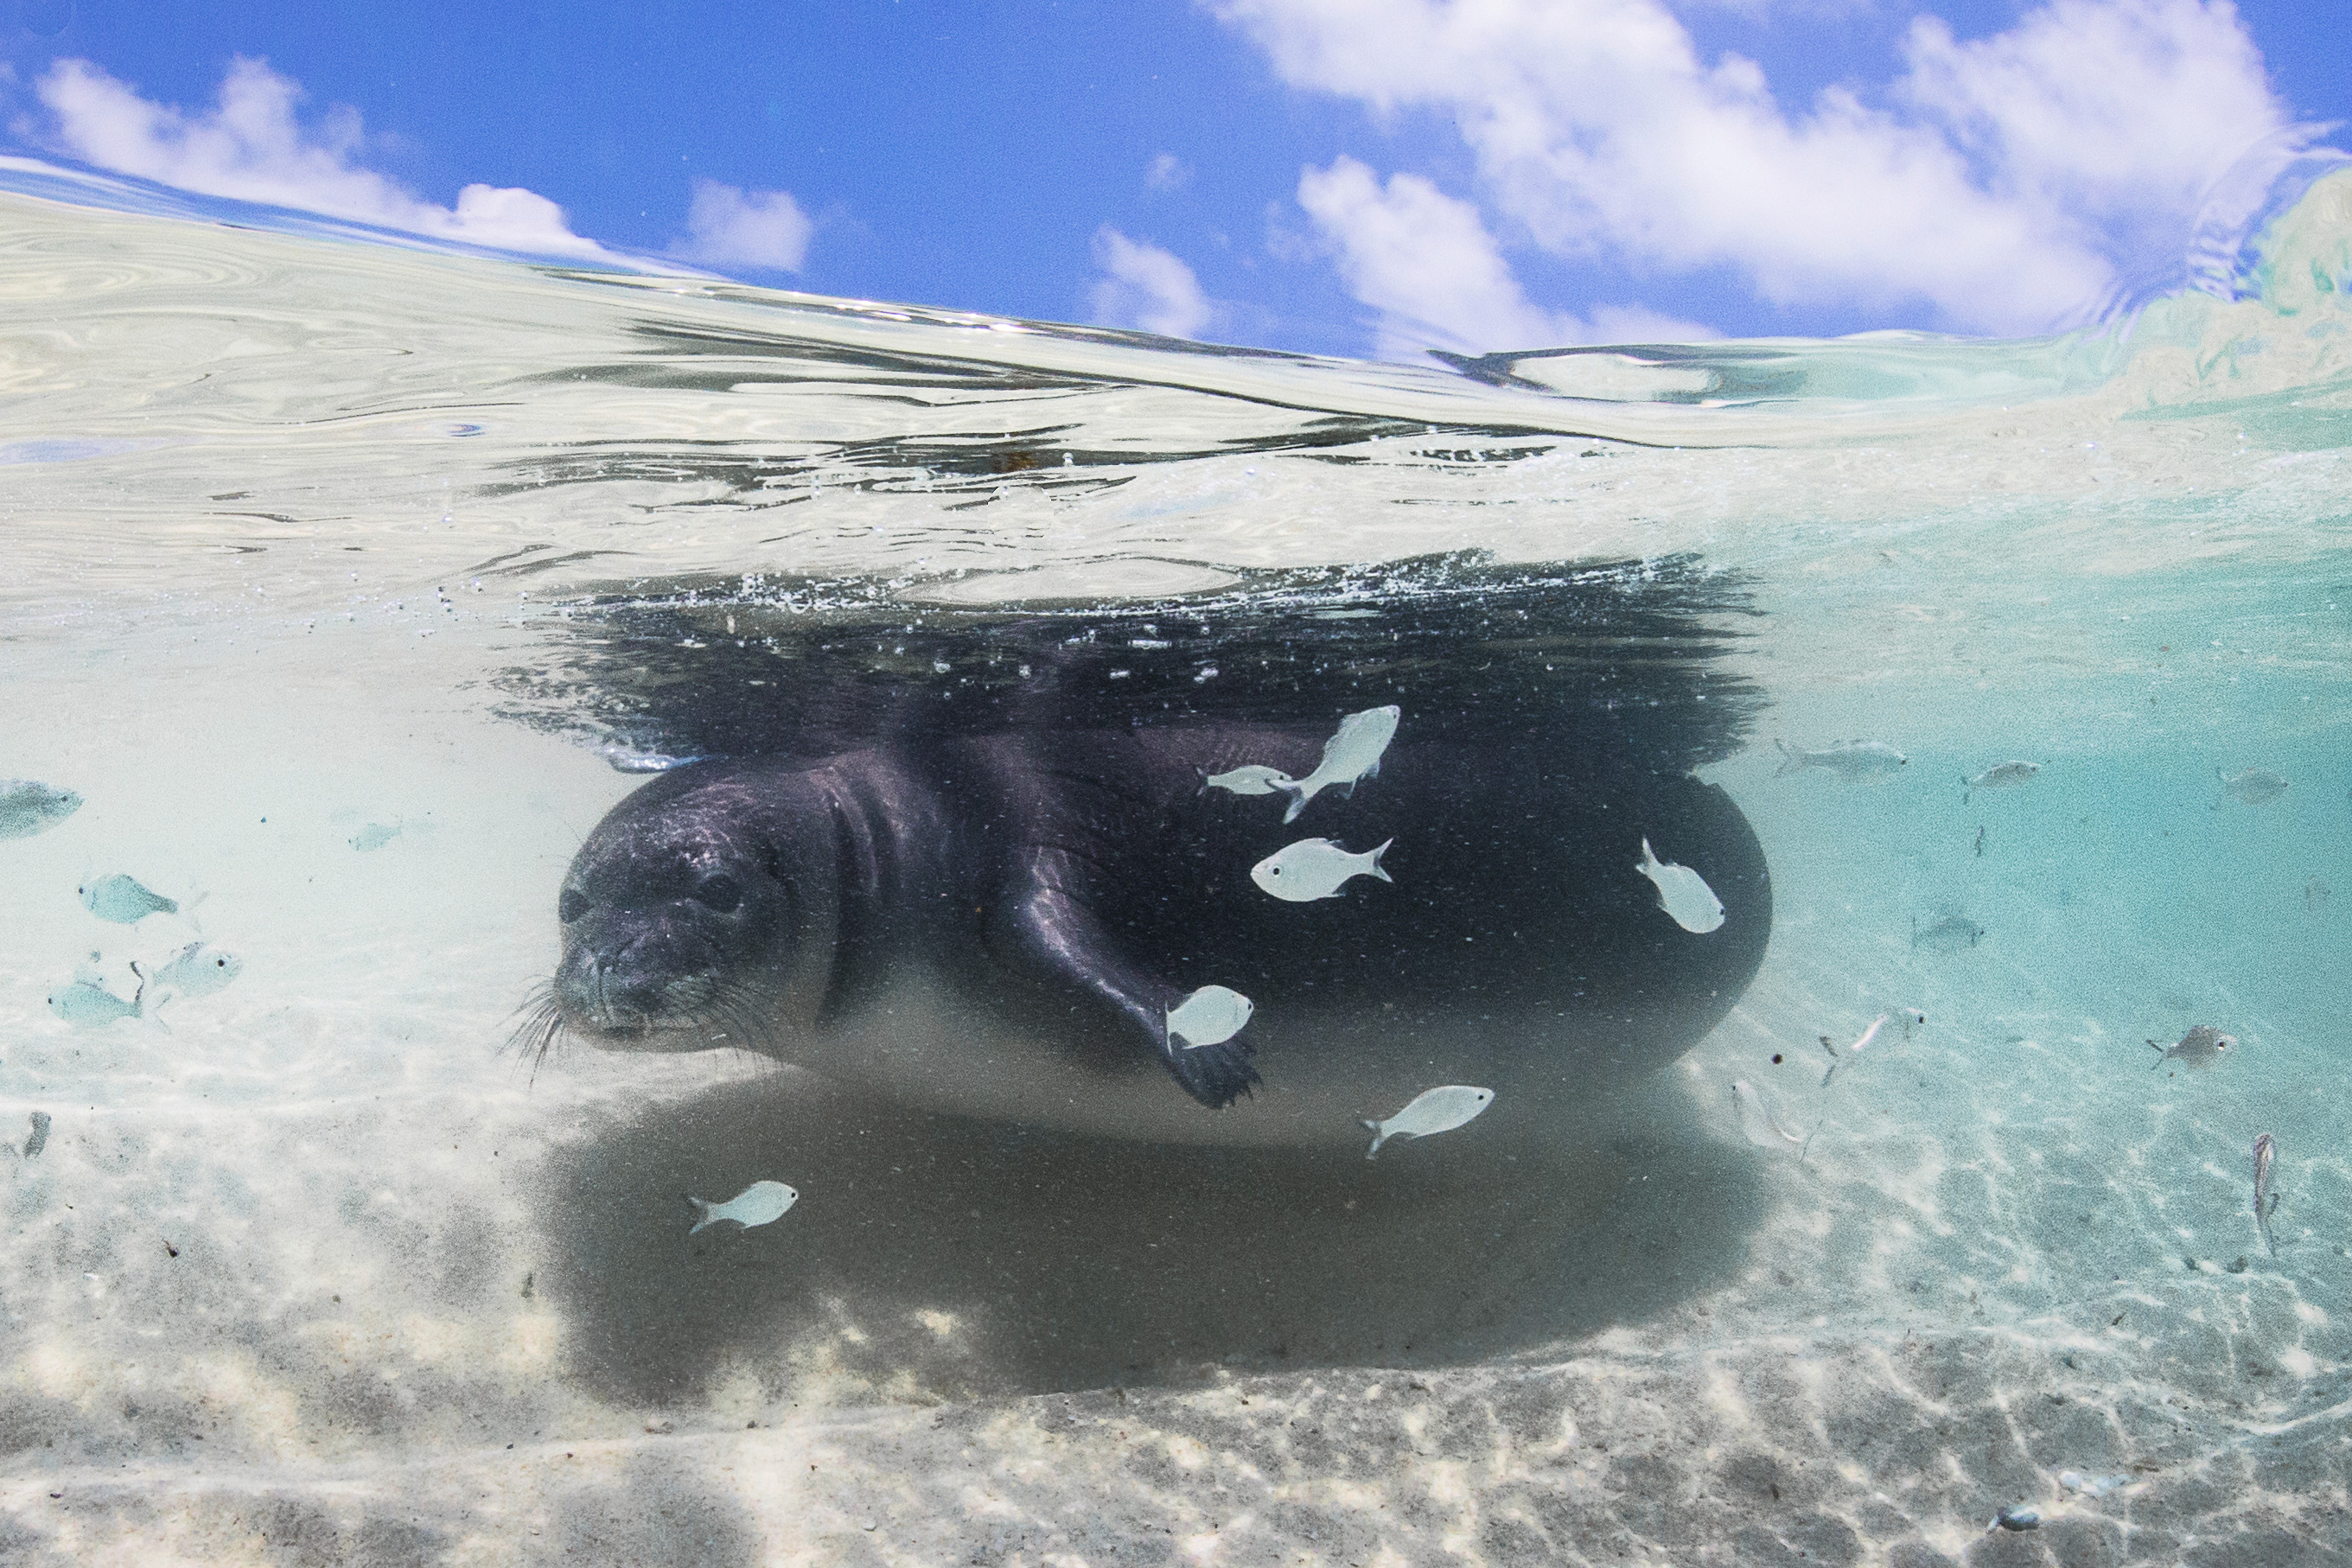 Monk seal pup underwater with small school of fish